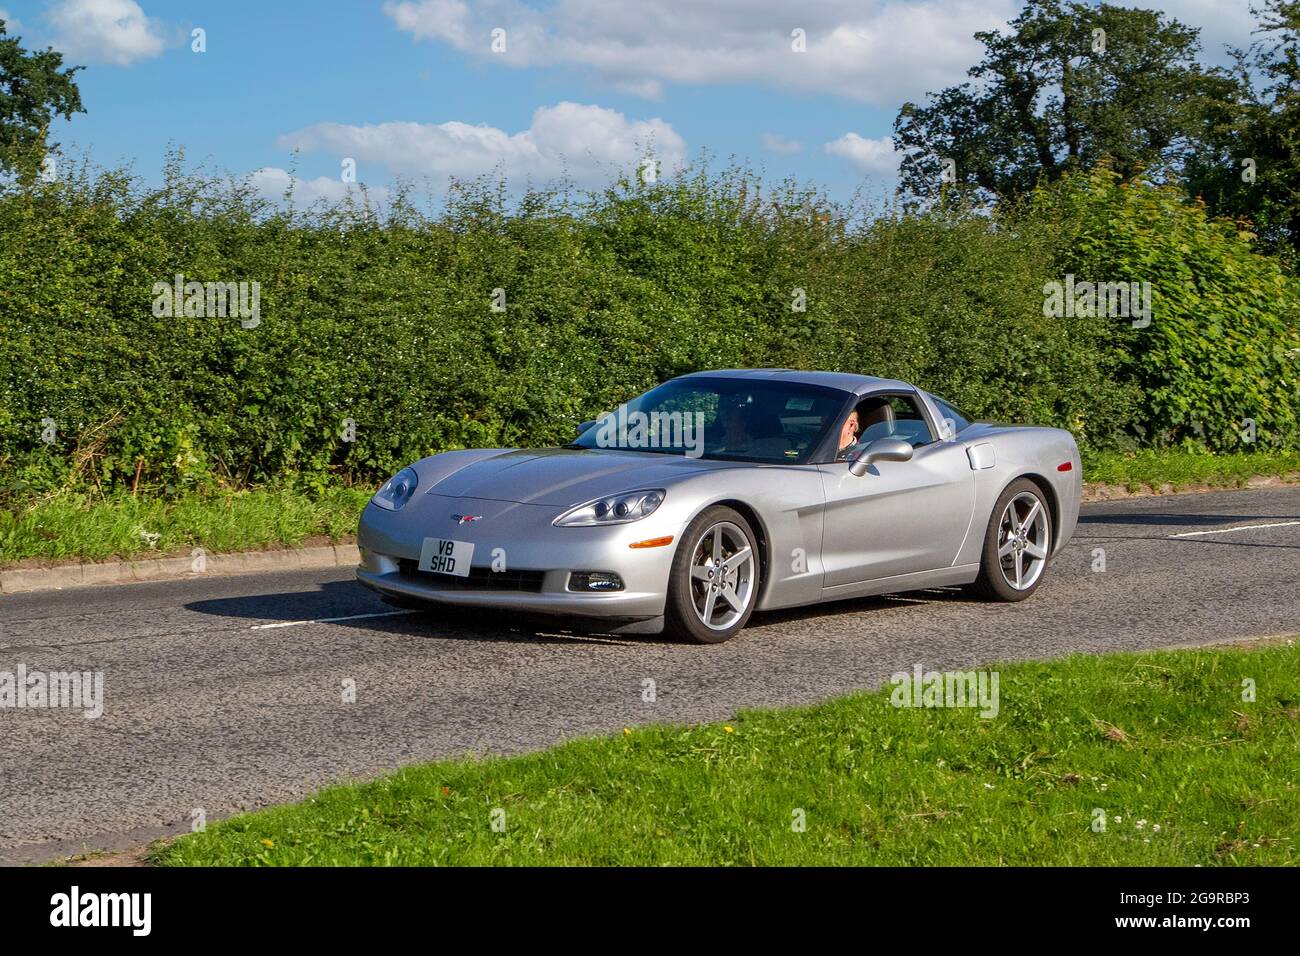 2005 silver Chevrolet Corvette 2dr  5987 cc, vehicle en-route to Capesthorne Hall classic July car show, Cheshire, UK Stock Photo